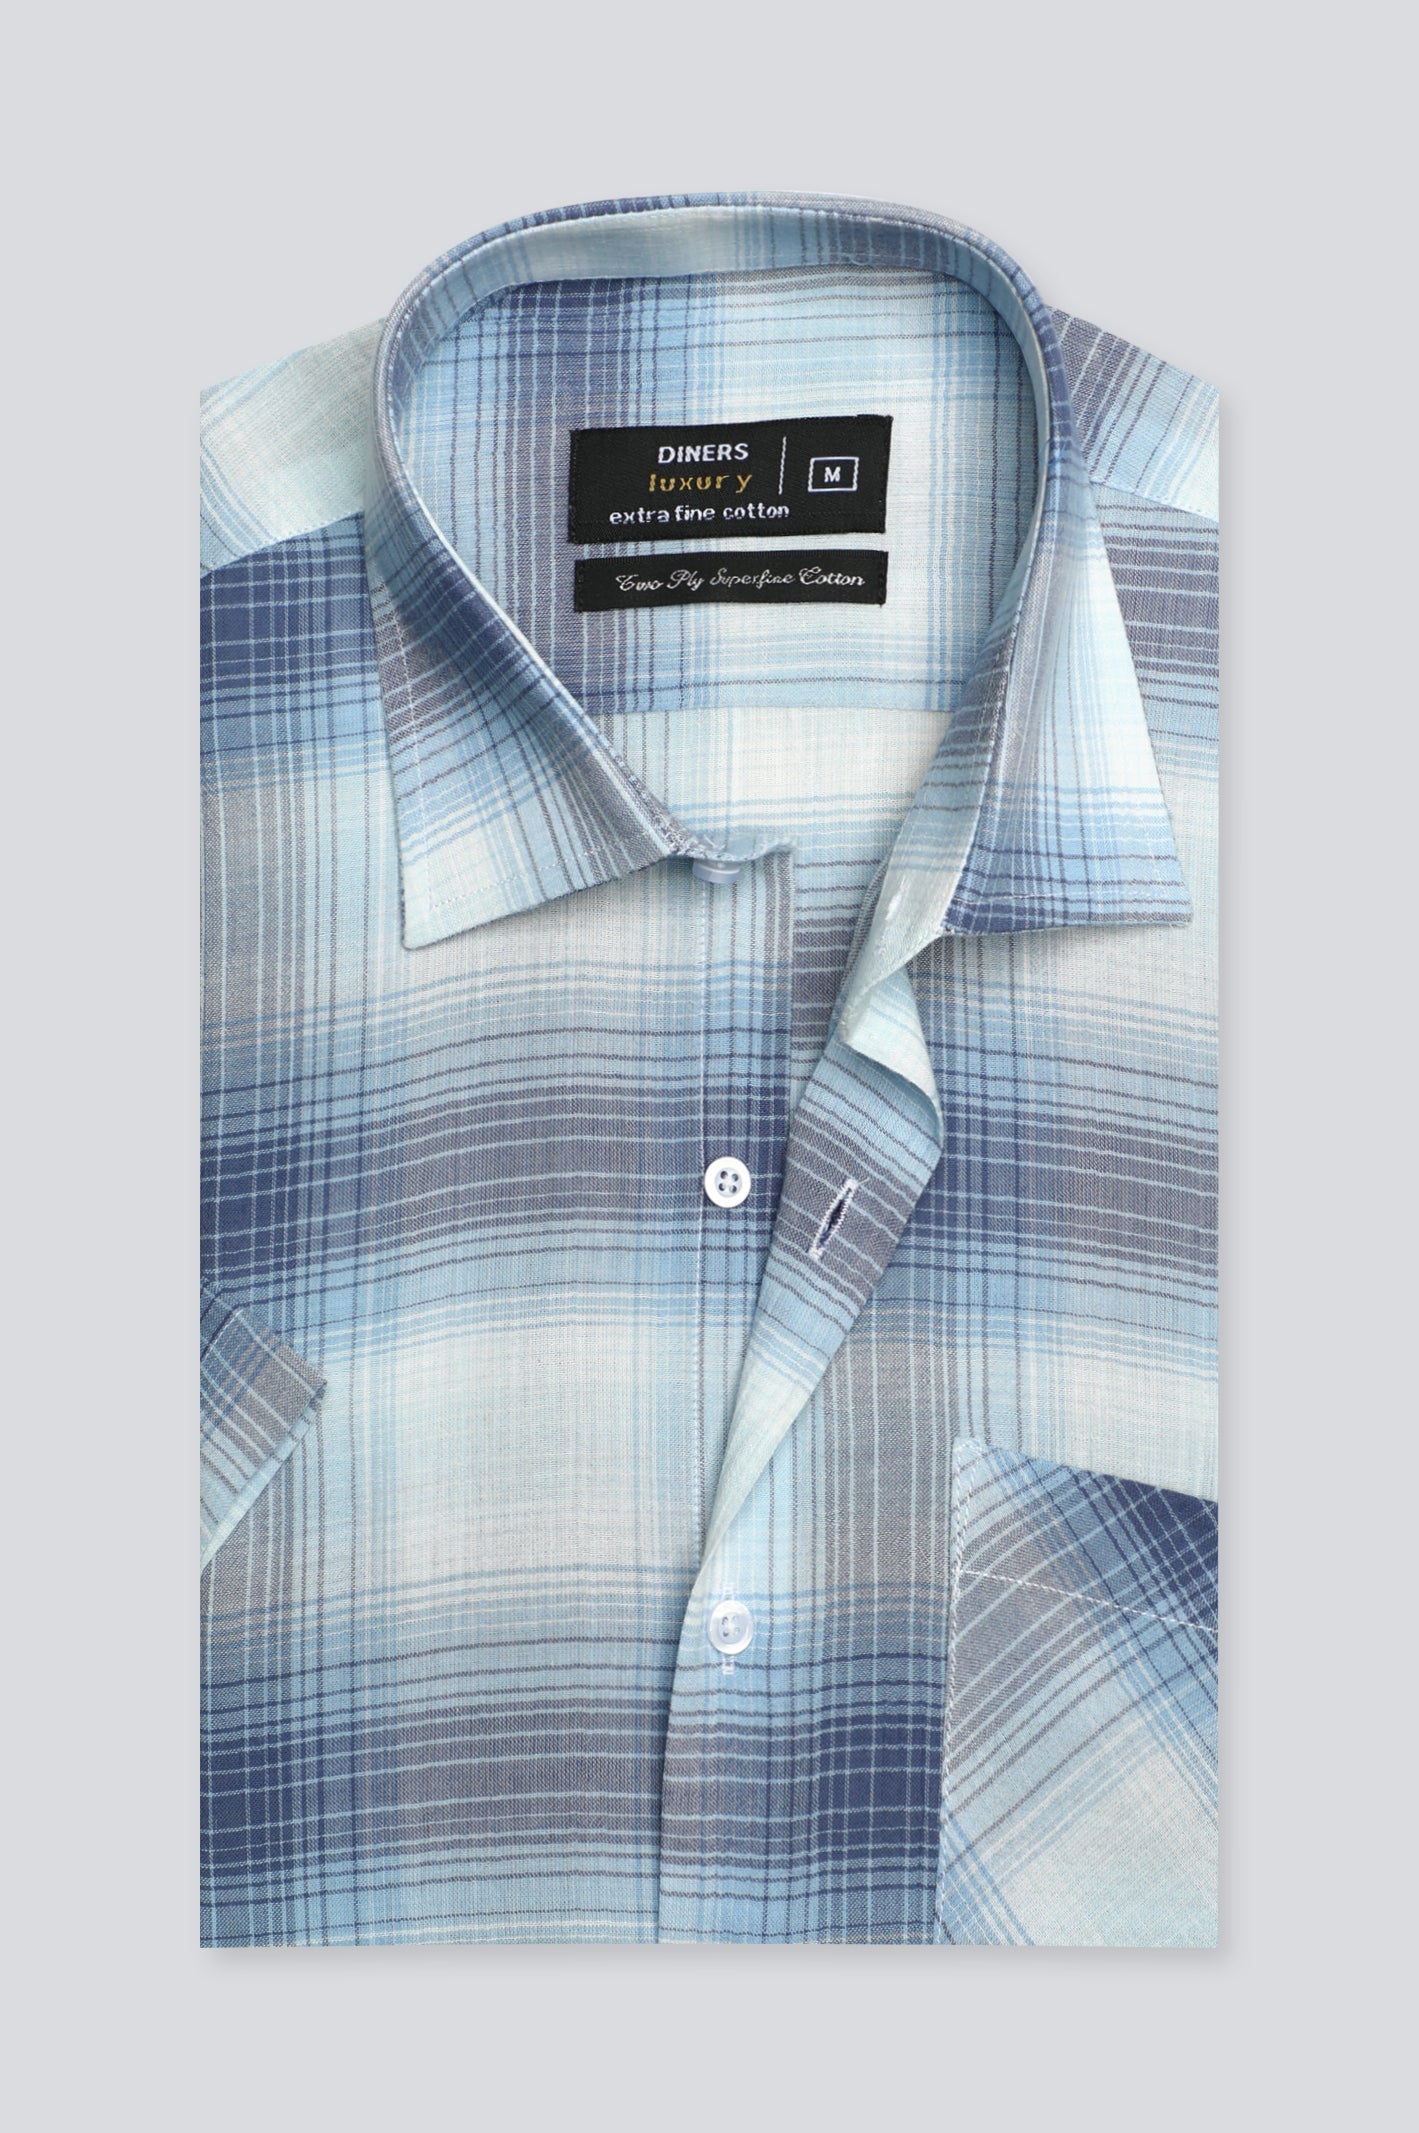 Glen Plaid Check Formal Shirt (Half Sleeves) From Diners